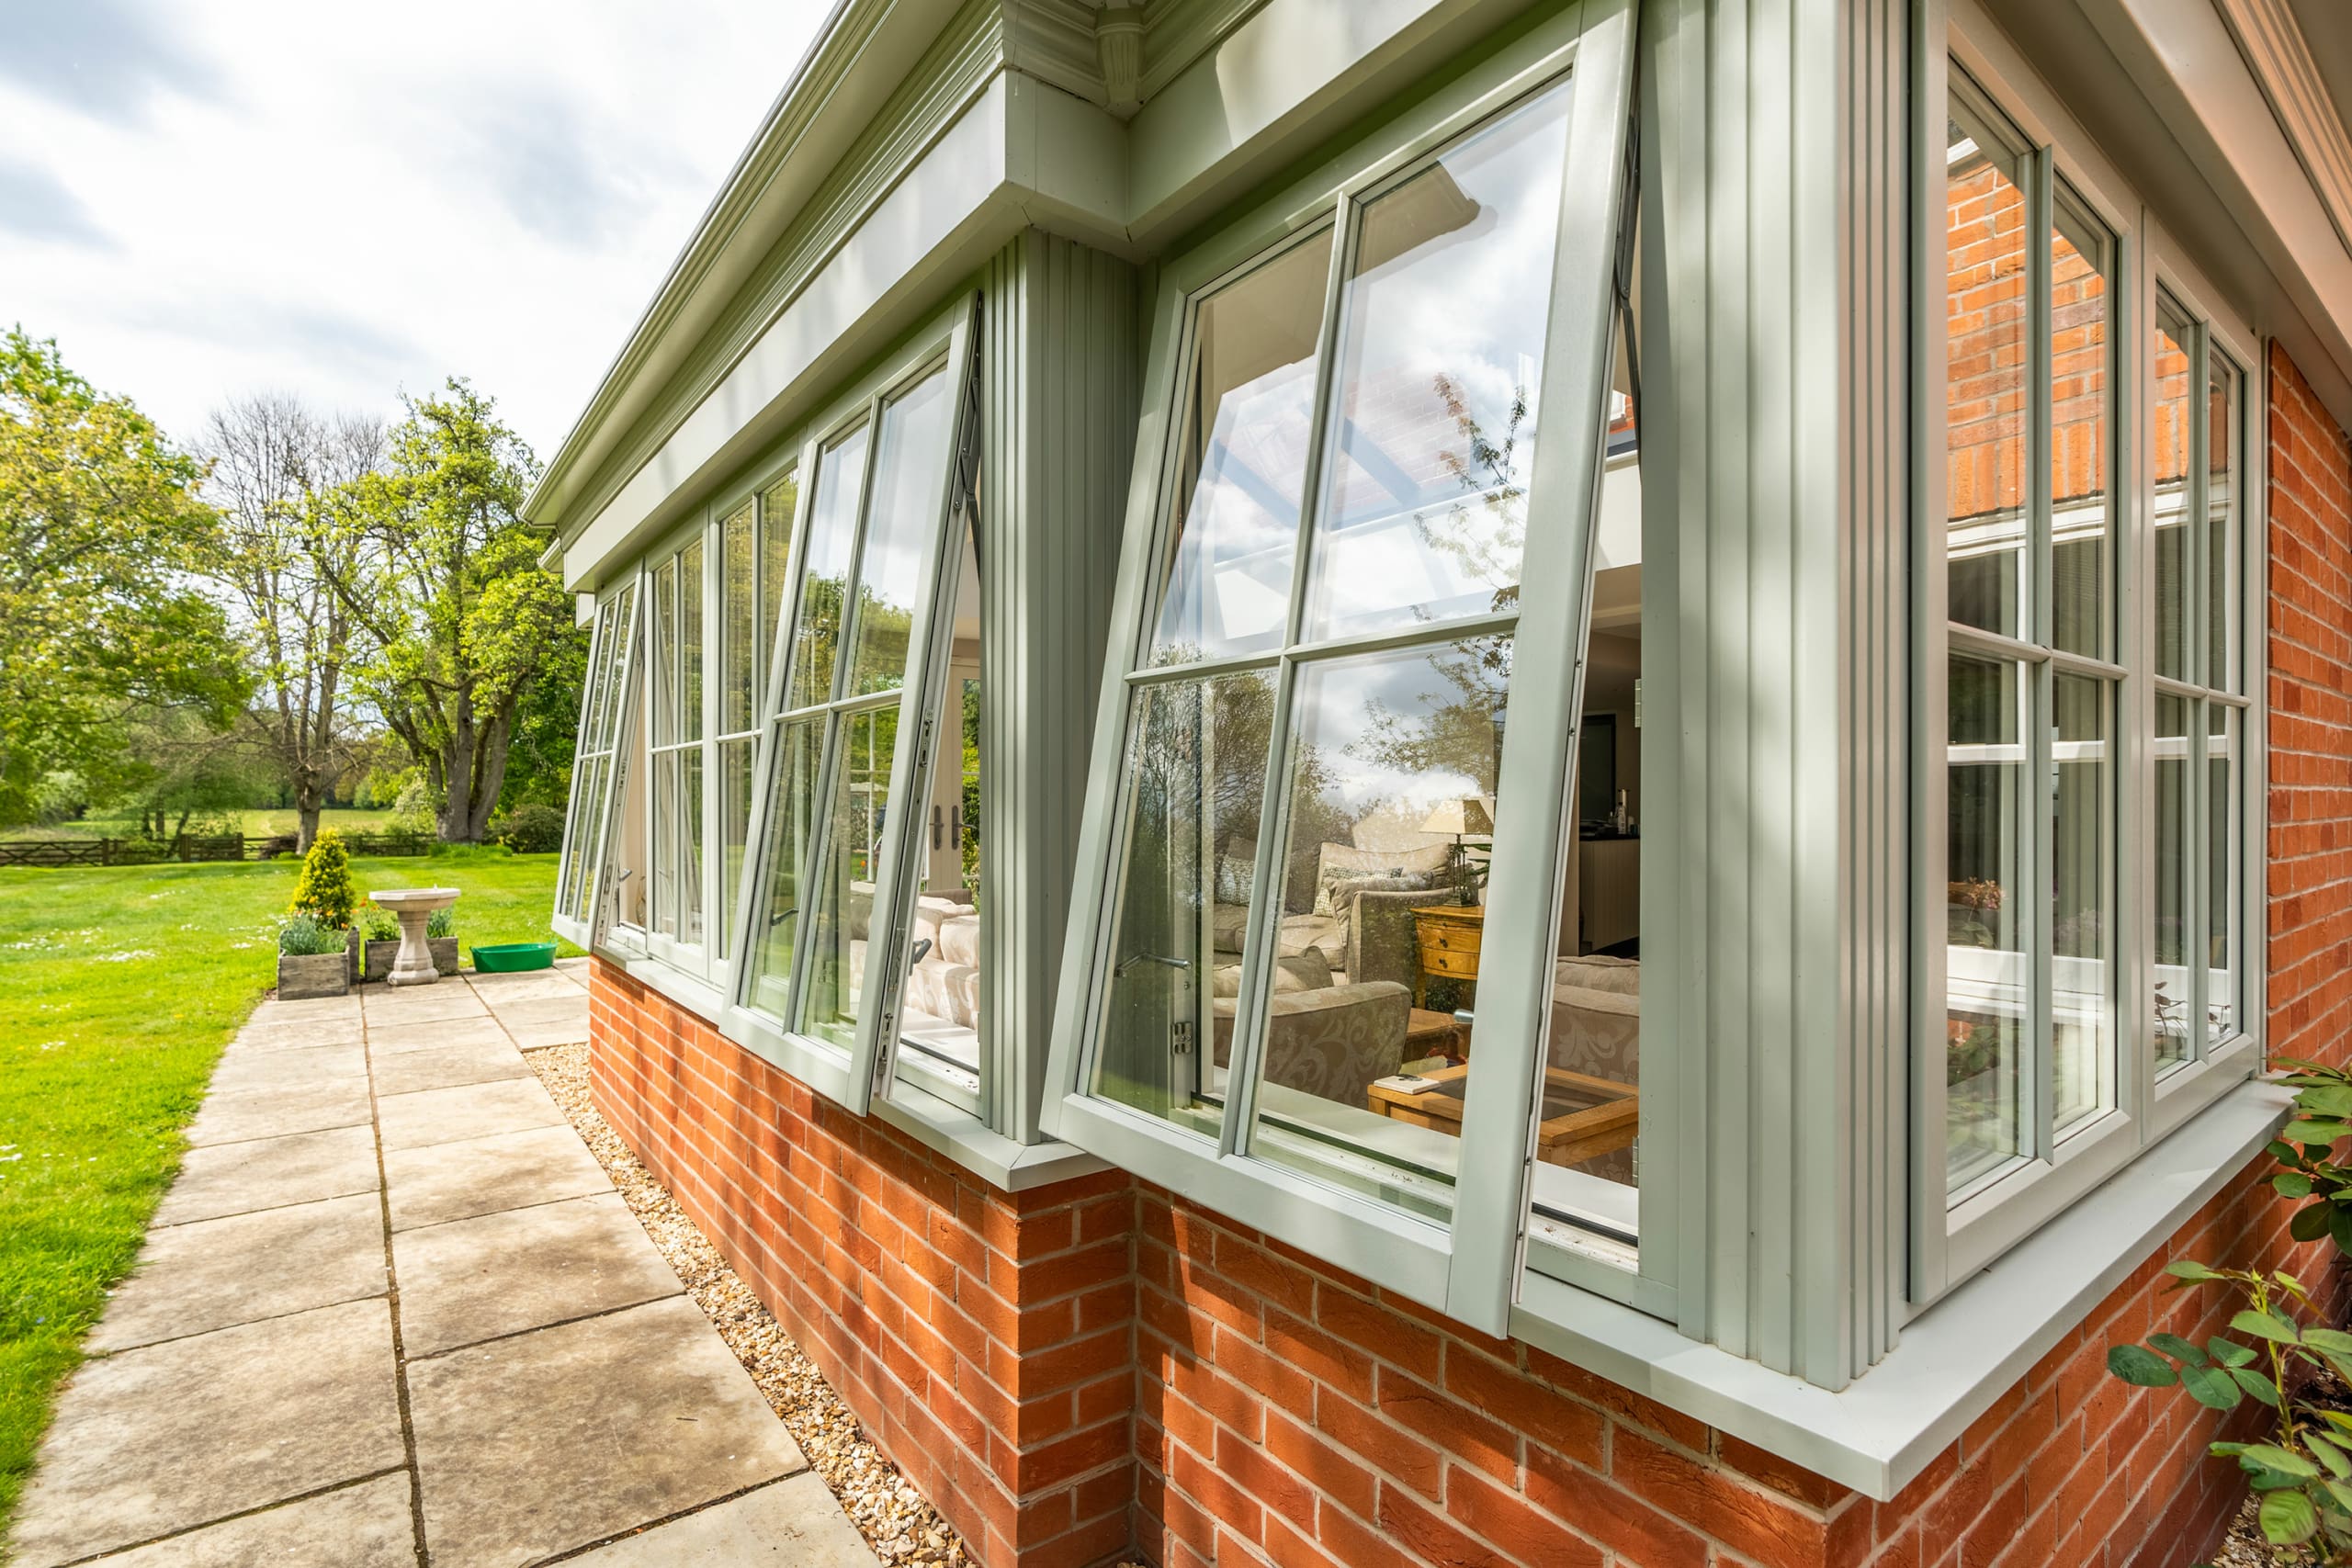 Open windows on a traditional orangery.